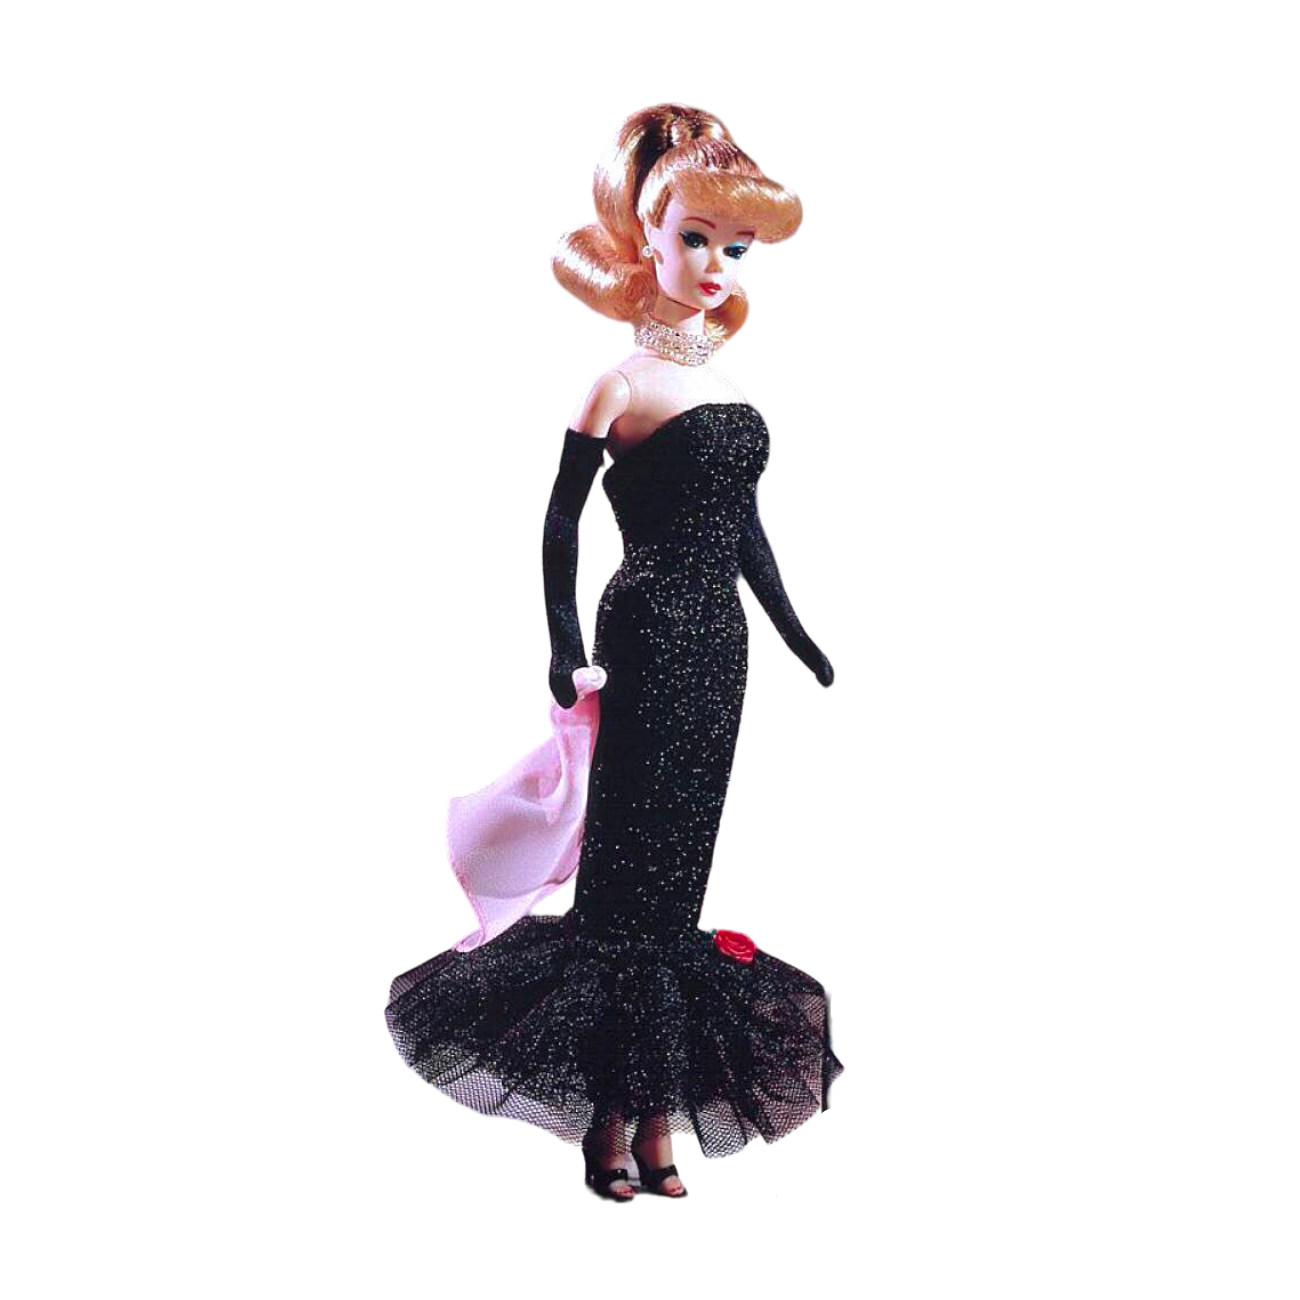 Solo in the spotlight Barbie doll wearing a black glittery fishtail gown with pink mesh handkerchief